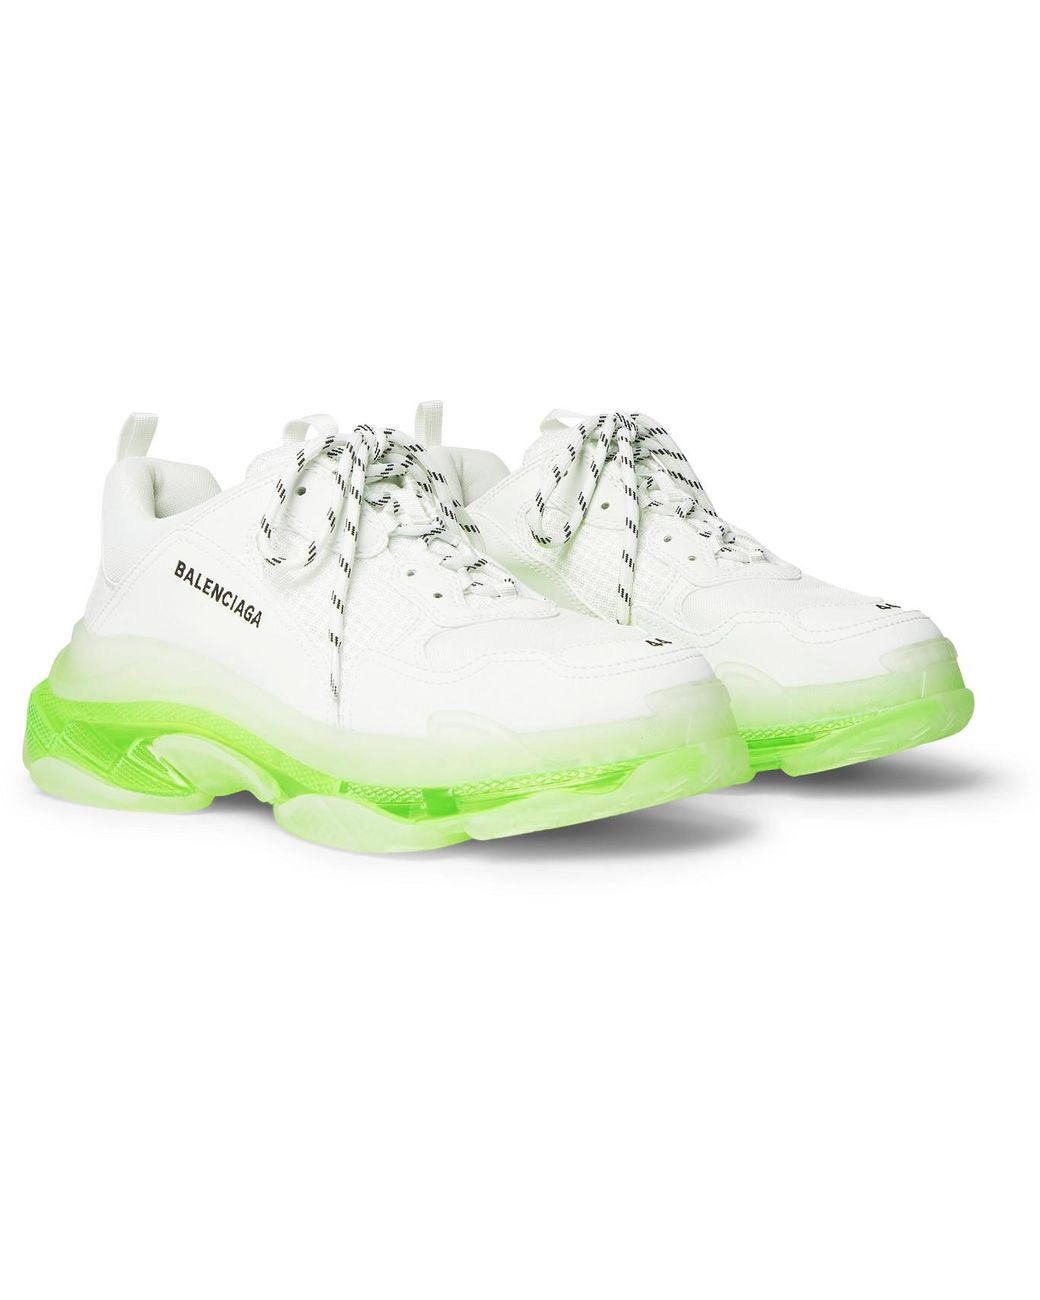 Balenciaga Triple S Clear Sole Mesh And Leather Sneakers in White for Men - Lyst